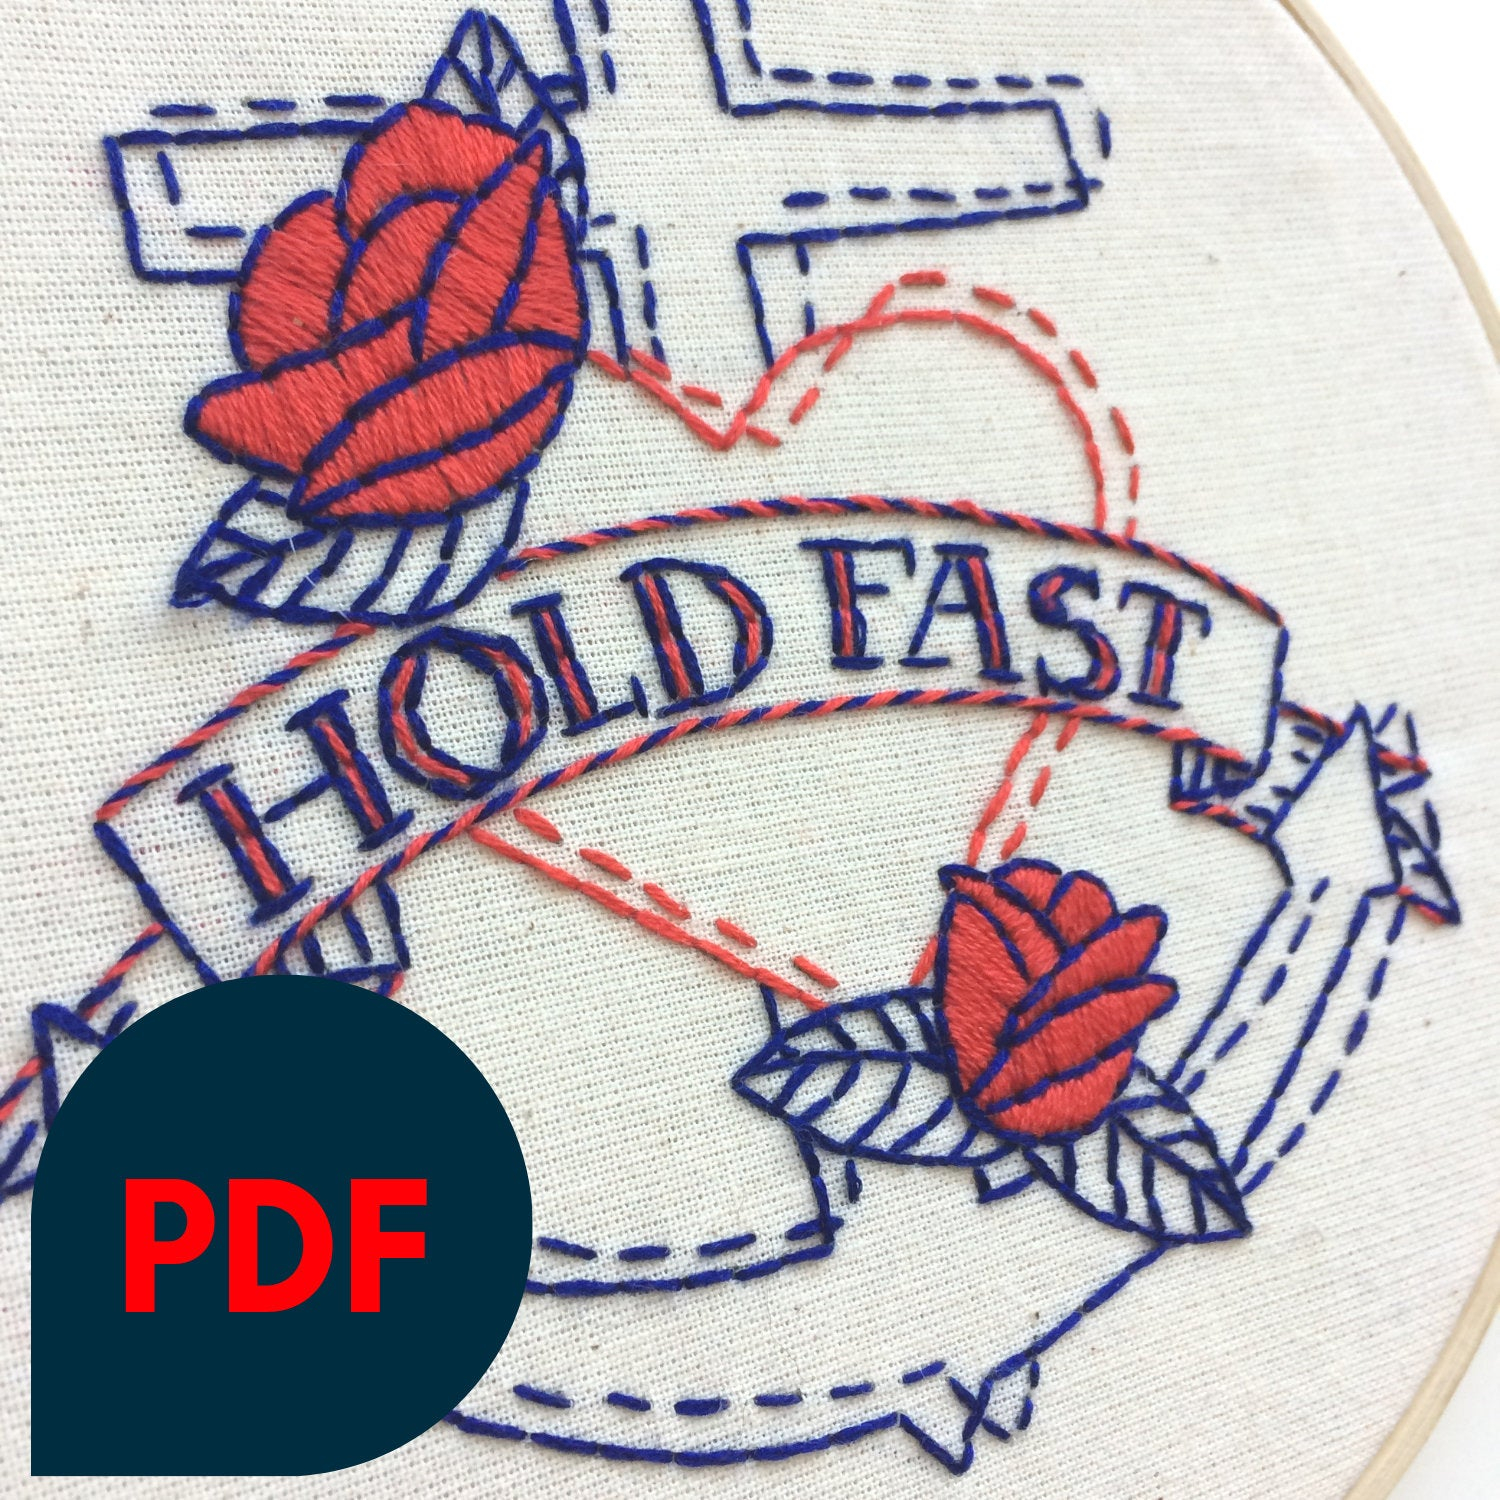 Nautical Embroidery Patterns Embroidery Pattern Pdf Holdfast Ocean Theme Boat Ship Anchor Tattoo Nautical Maritime Beach Seaside Heart Beginner